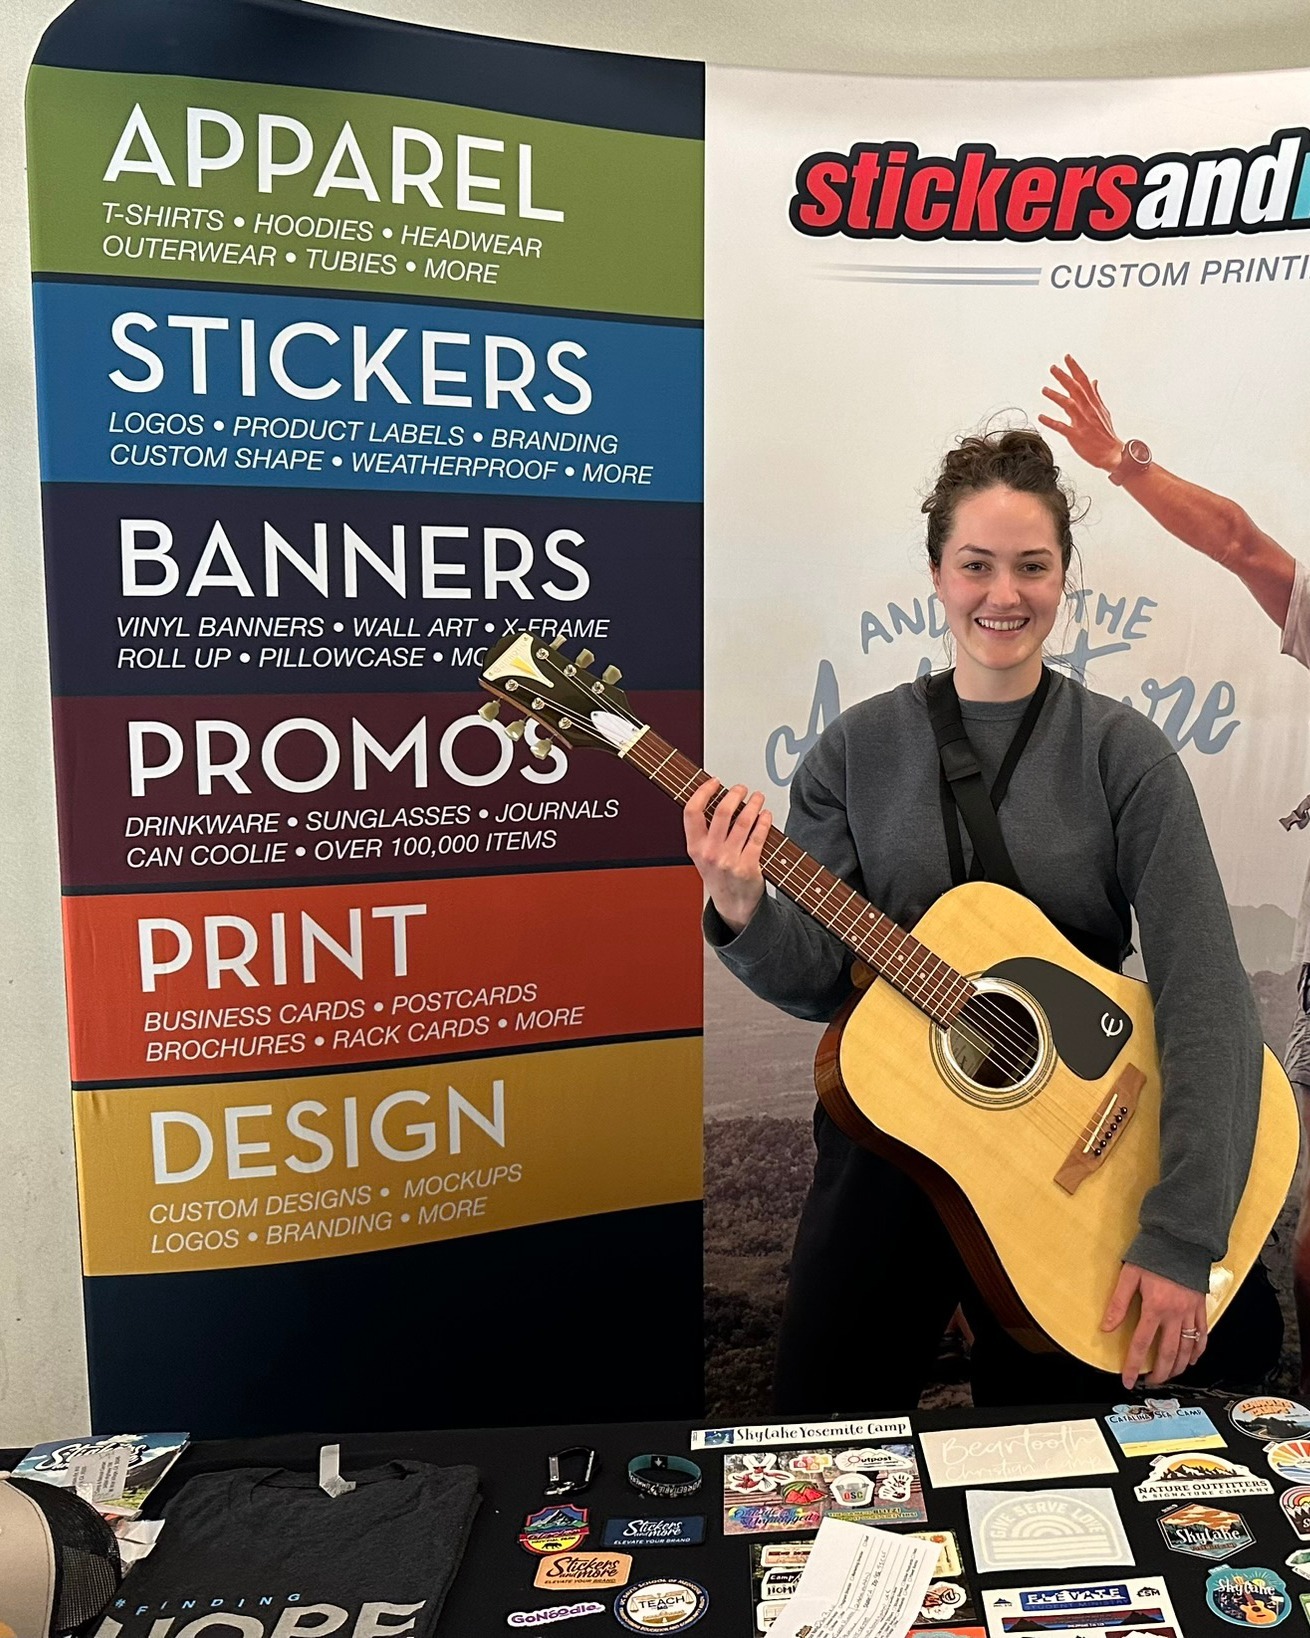 🎶 I want to rock and roll all night ,and BUY PROMOS AT STICKERS AND MORE 🎶

Guitar Winner at 2024 CCCA Sierra Pacific Conference 🎸
Congratulations Nikohl from Mount Hermon!

#StickersAndMore
#ElevateYourBrand